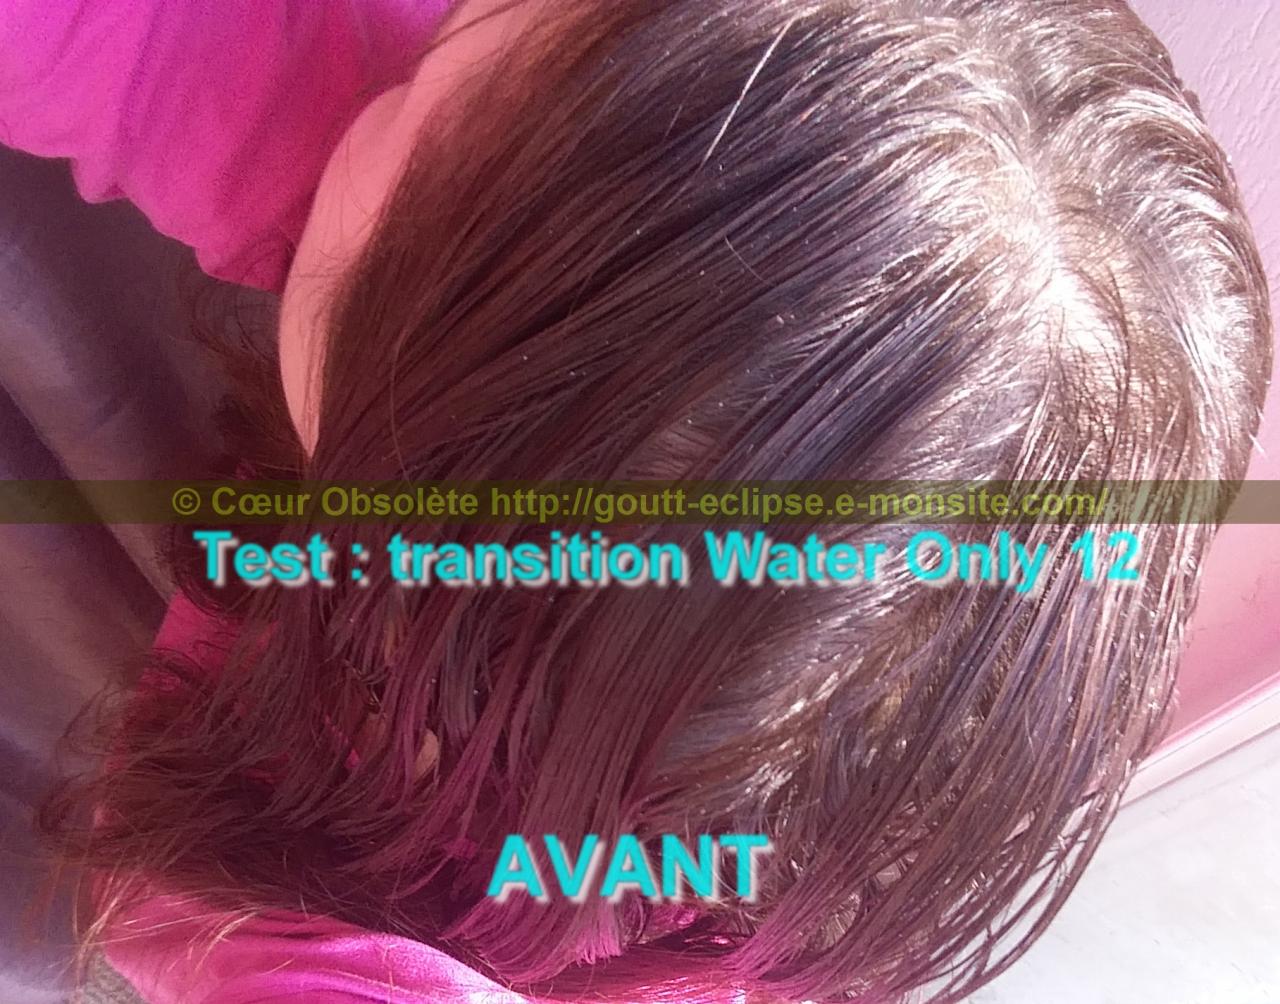 21 Fév 2018 Test Water Only Transition lavage N°12 photo AVANT 4